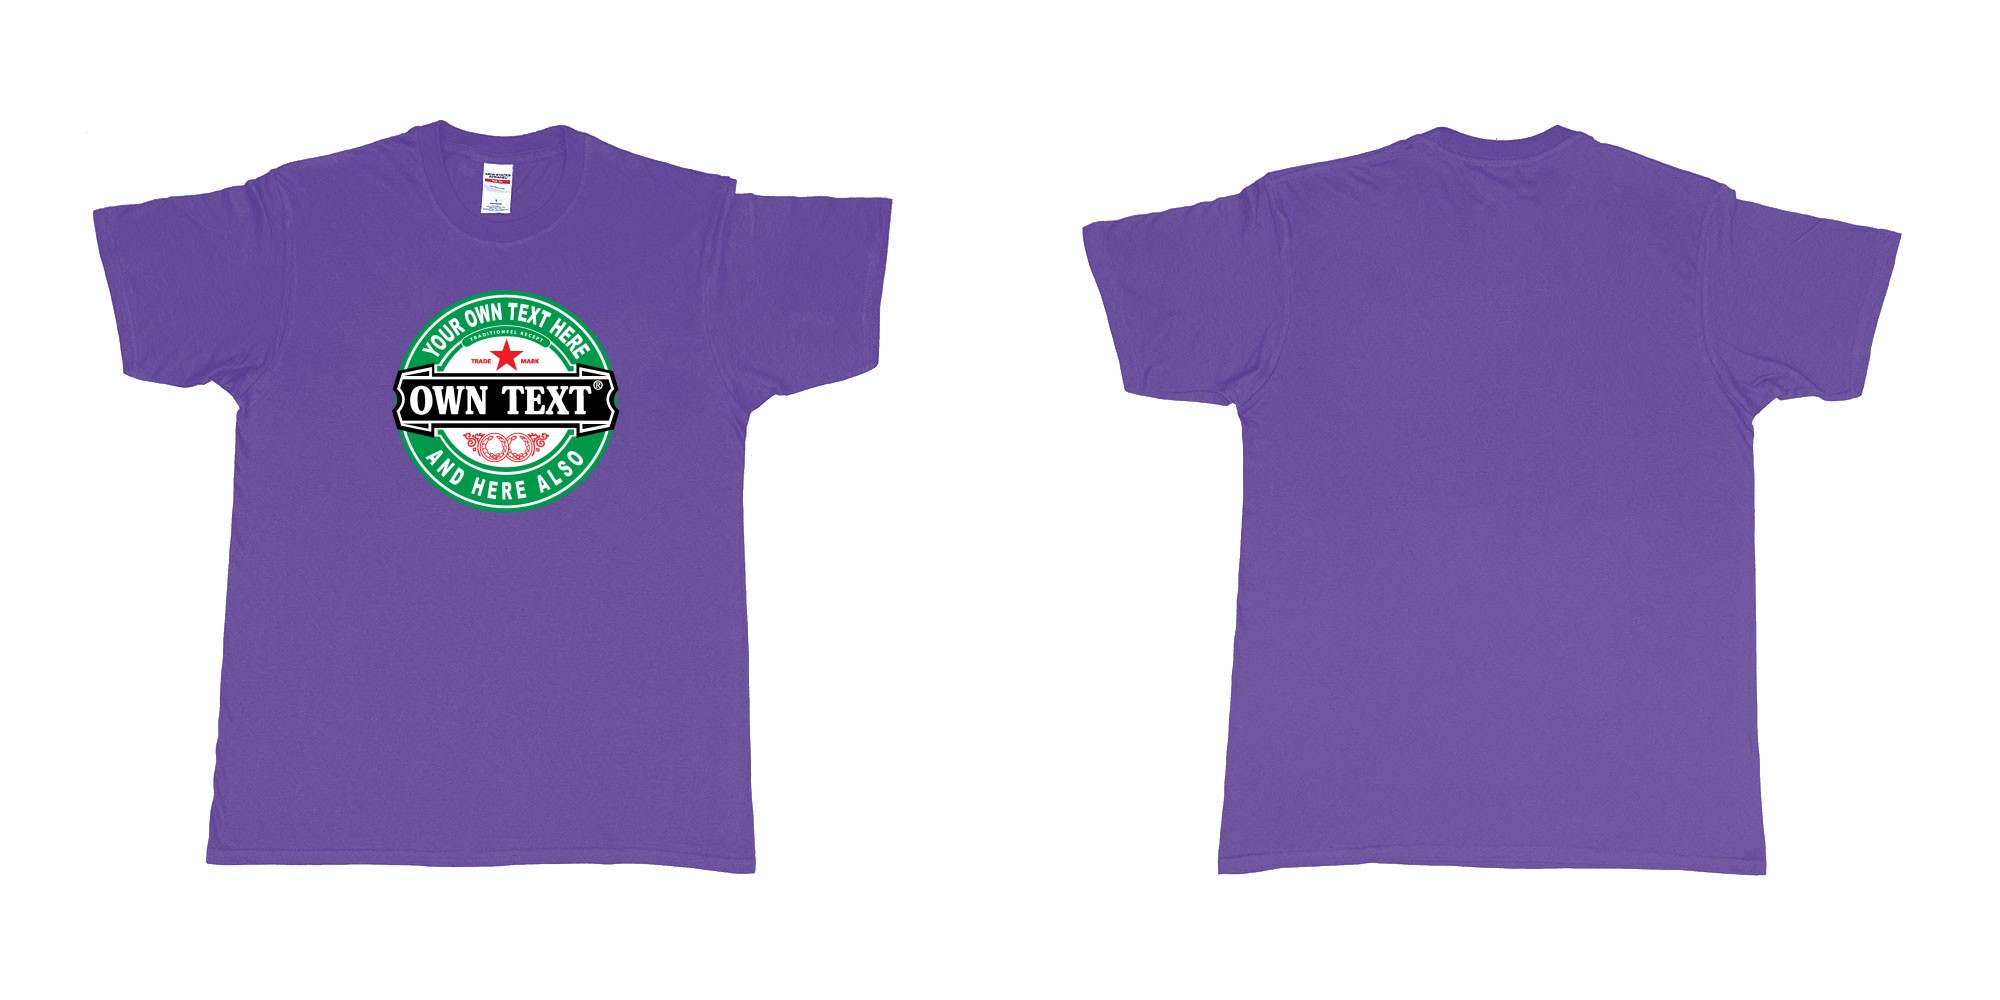 Custom tshirt design Heineken beer in fabric color purple choice your own text made in Bali by The Pirate Way